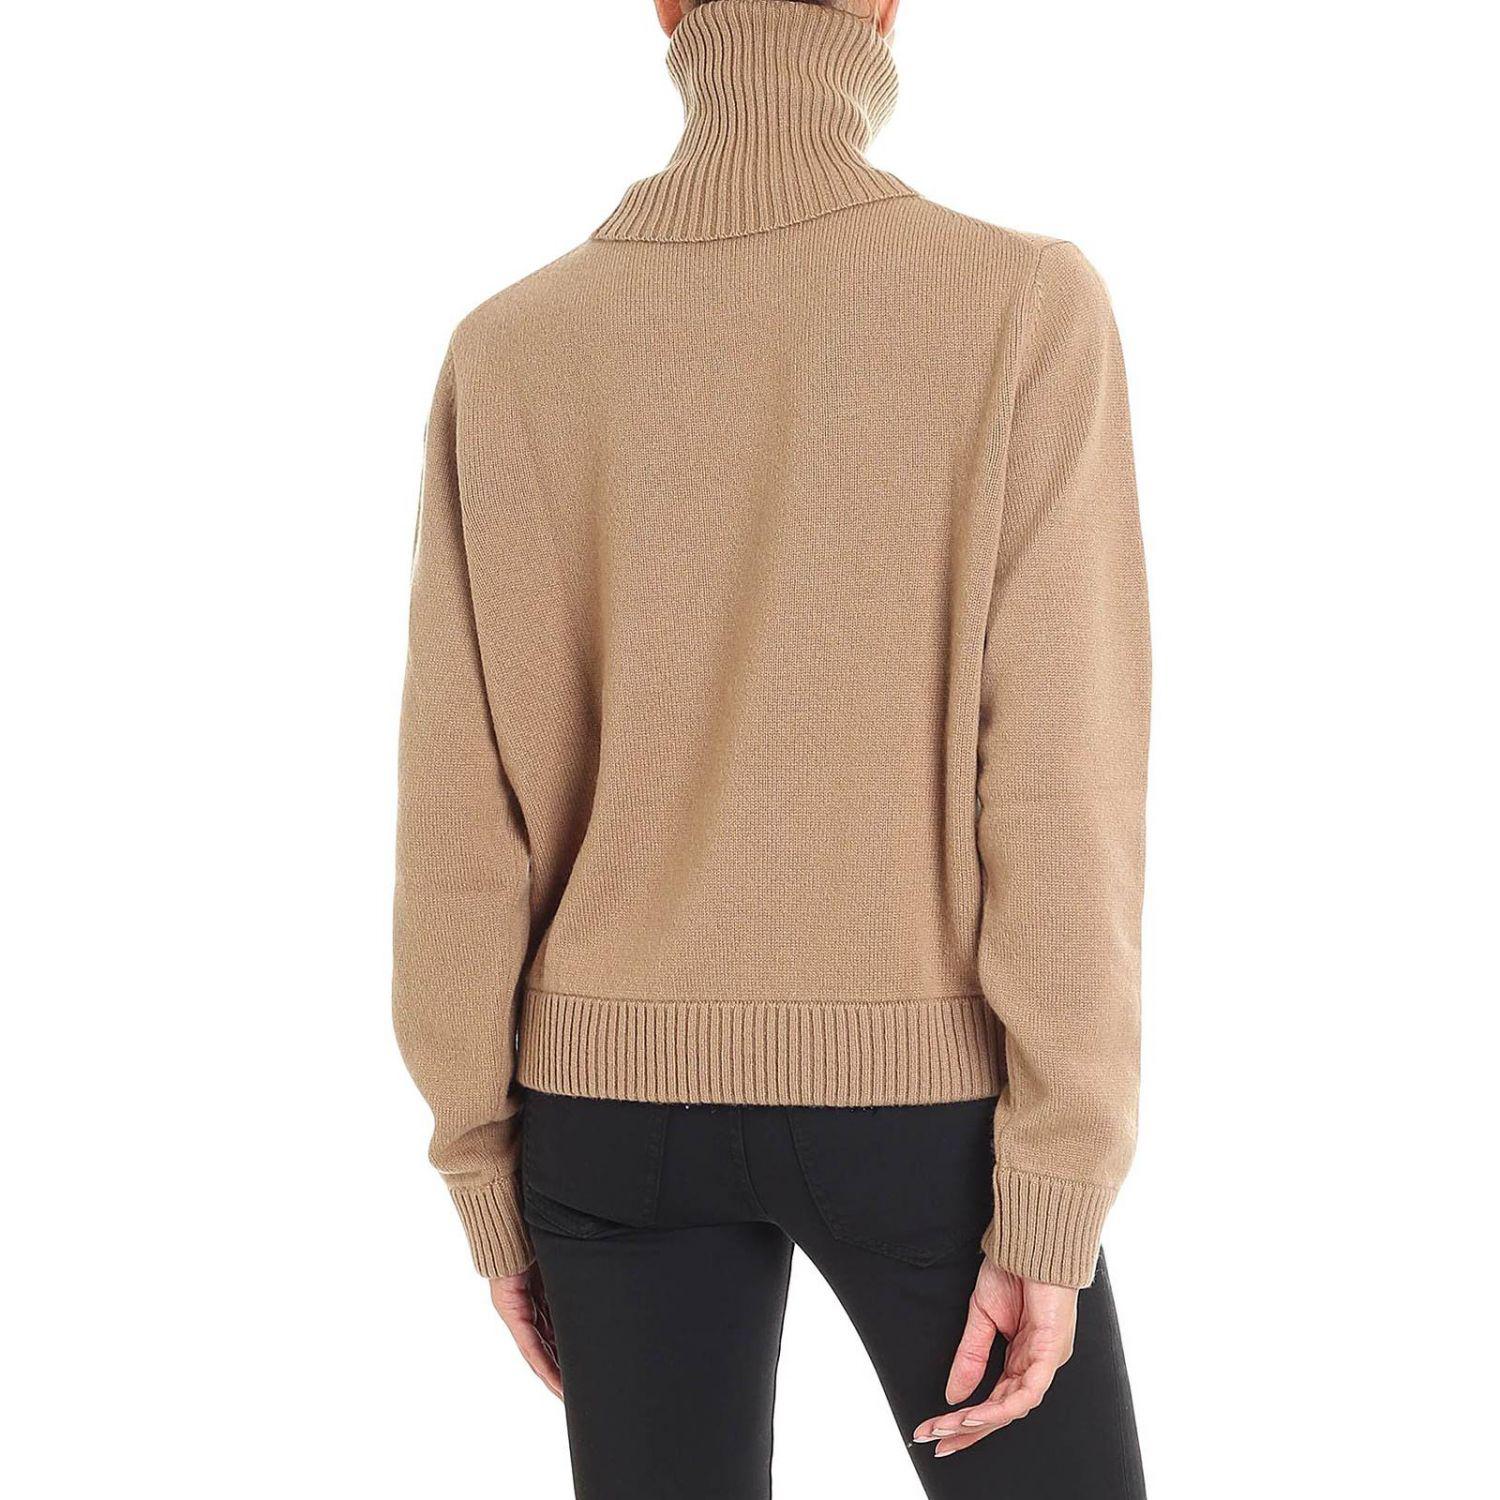 DSquared² Wool Camel Color Crop Turtleneck Sweater in Natural - Lyst